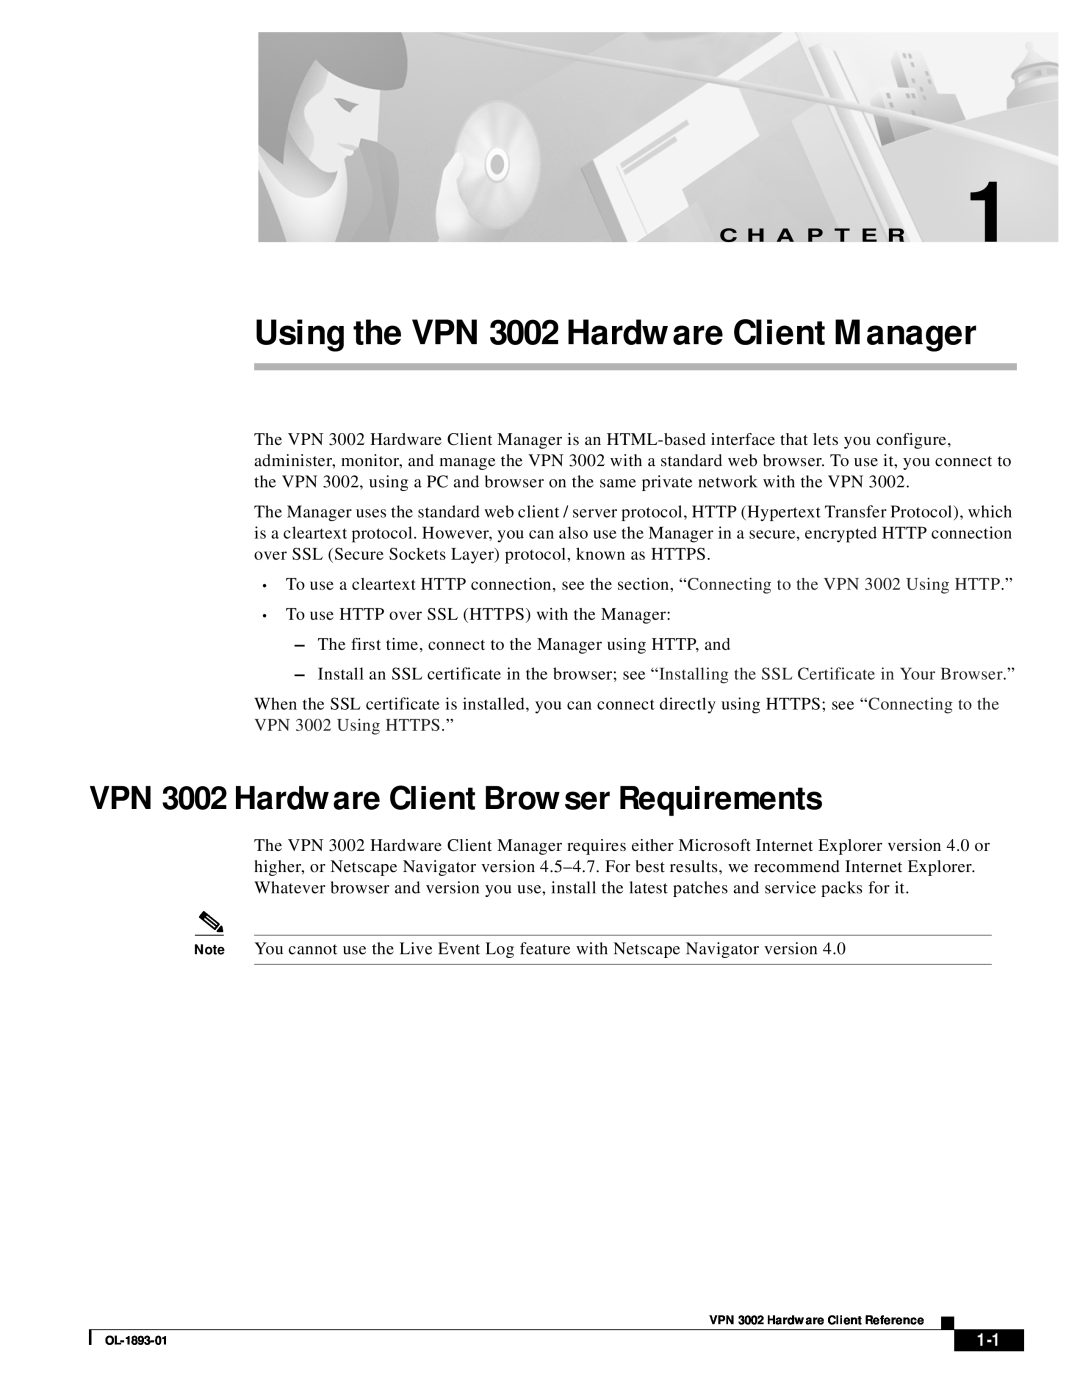 Cisco Systems Using the VPN 3002 Hardware Client Manager, VPN 3002 Hardware Client Browser Requirements, C H A P T E R 